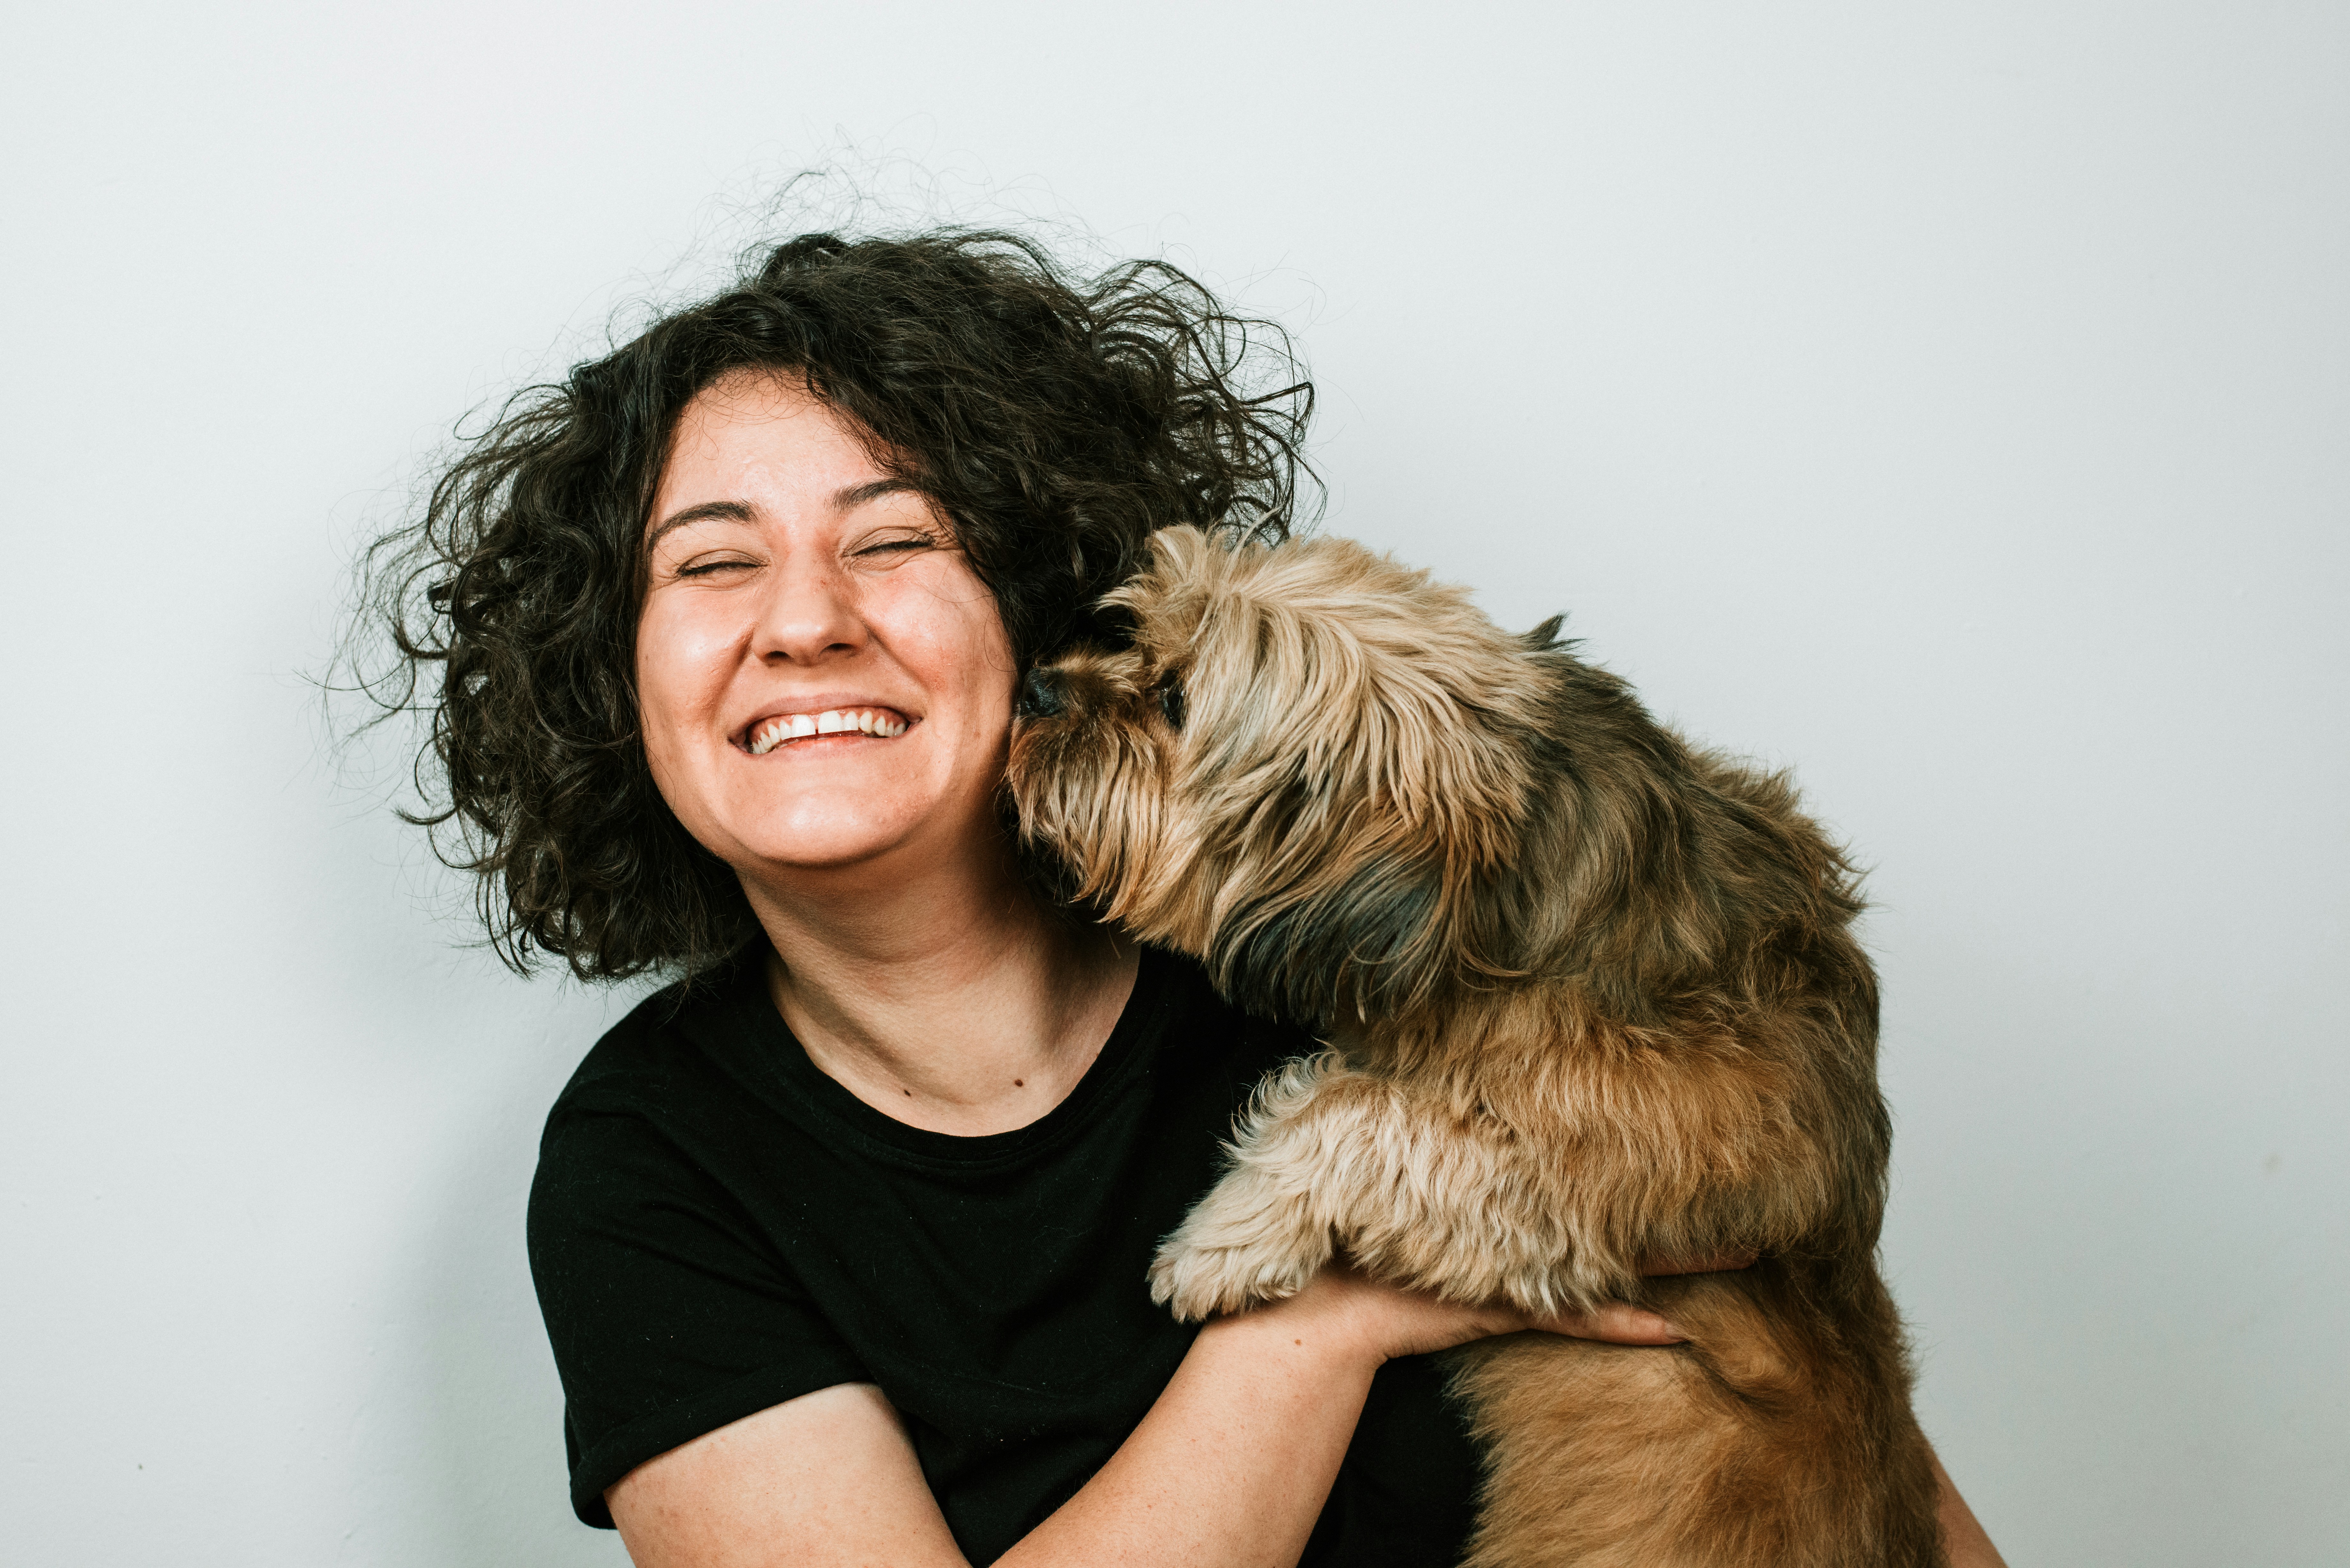 Woman with a smile happy holding a small scruffy dog who is liking the person's face